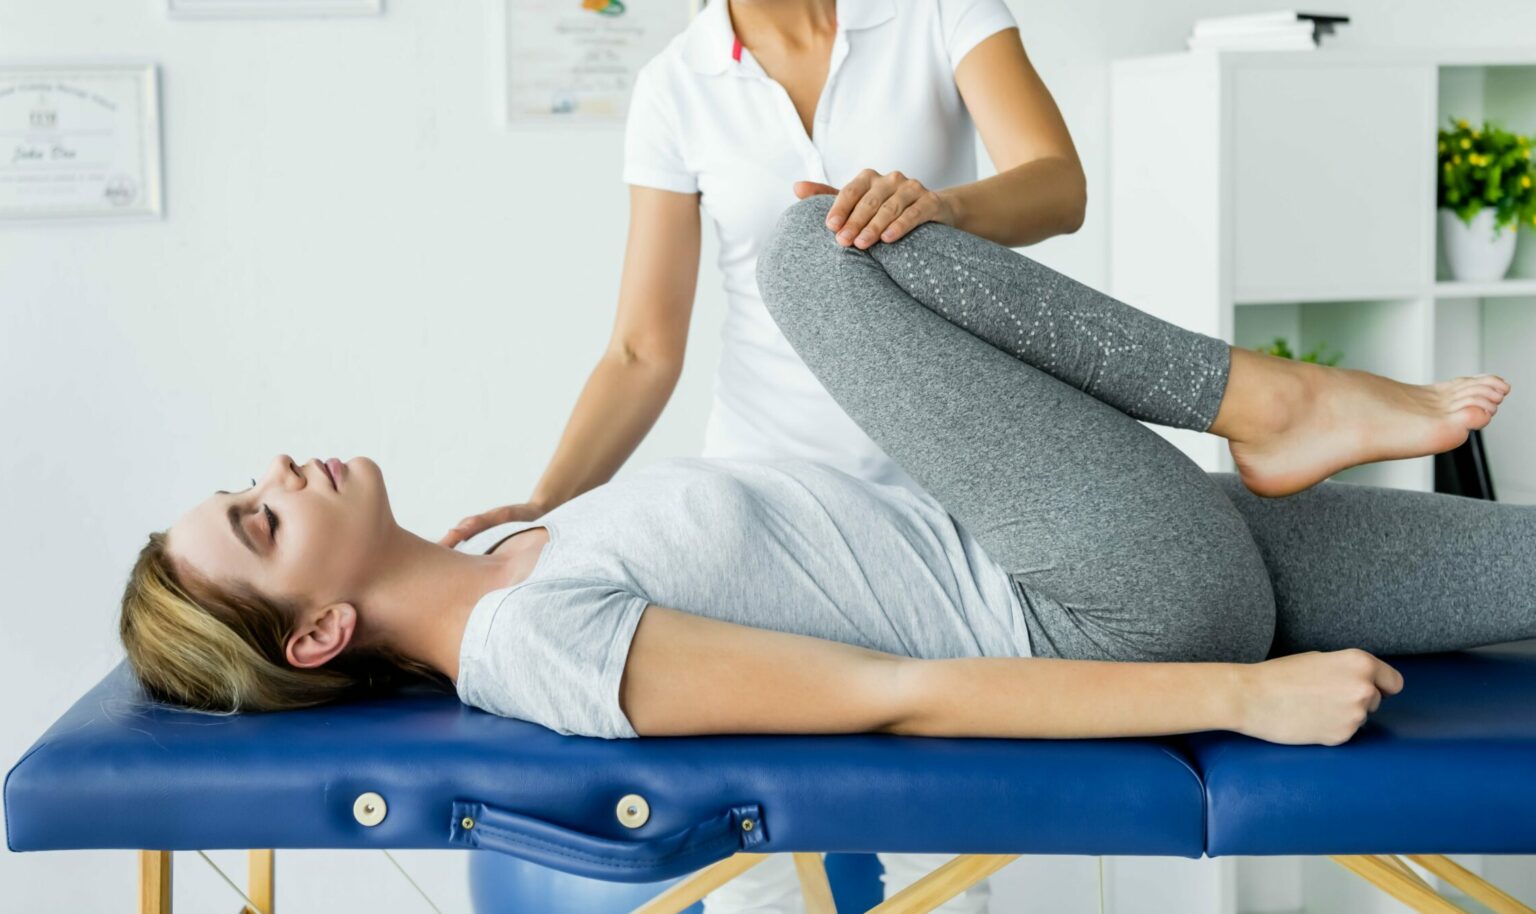 chiropractor touching leg of attractive patient in 2023 01 06 02 01 06 utc scaled e1682593309718